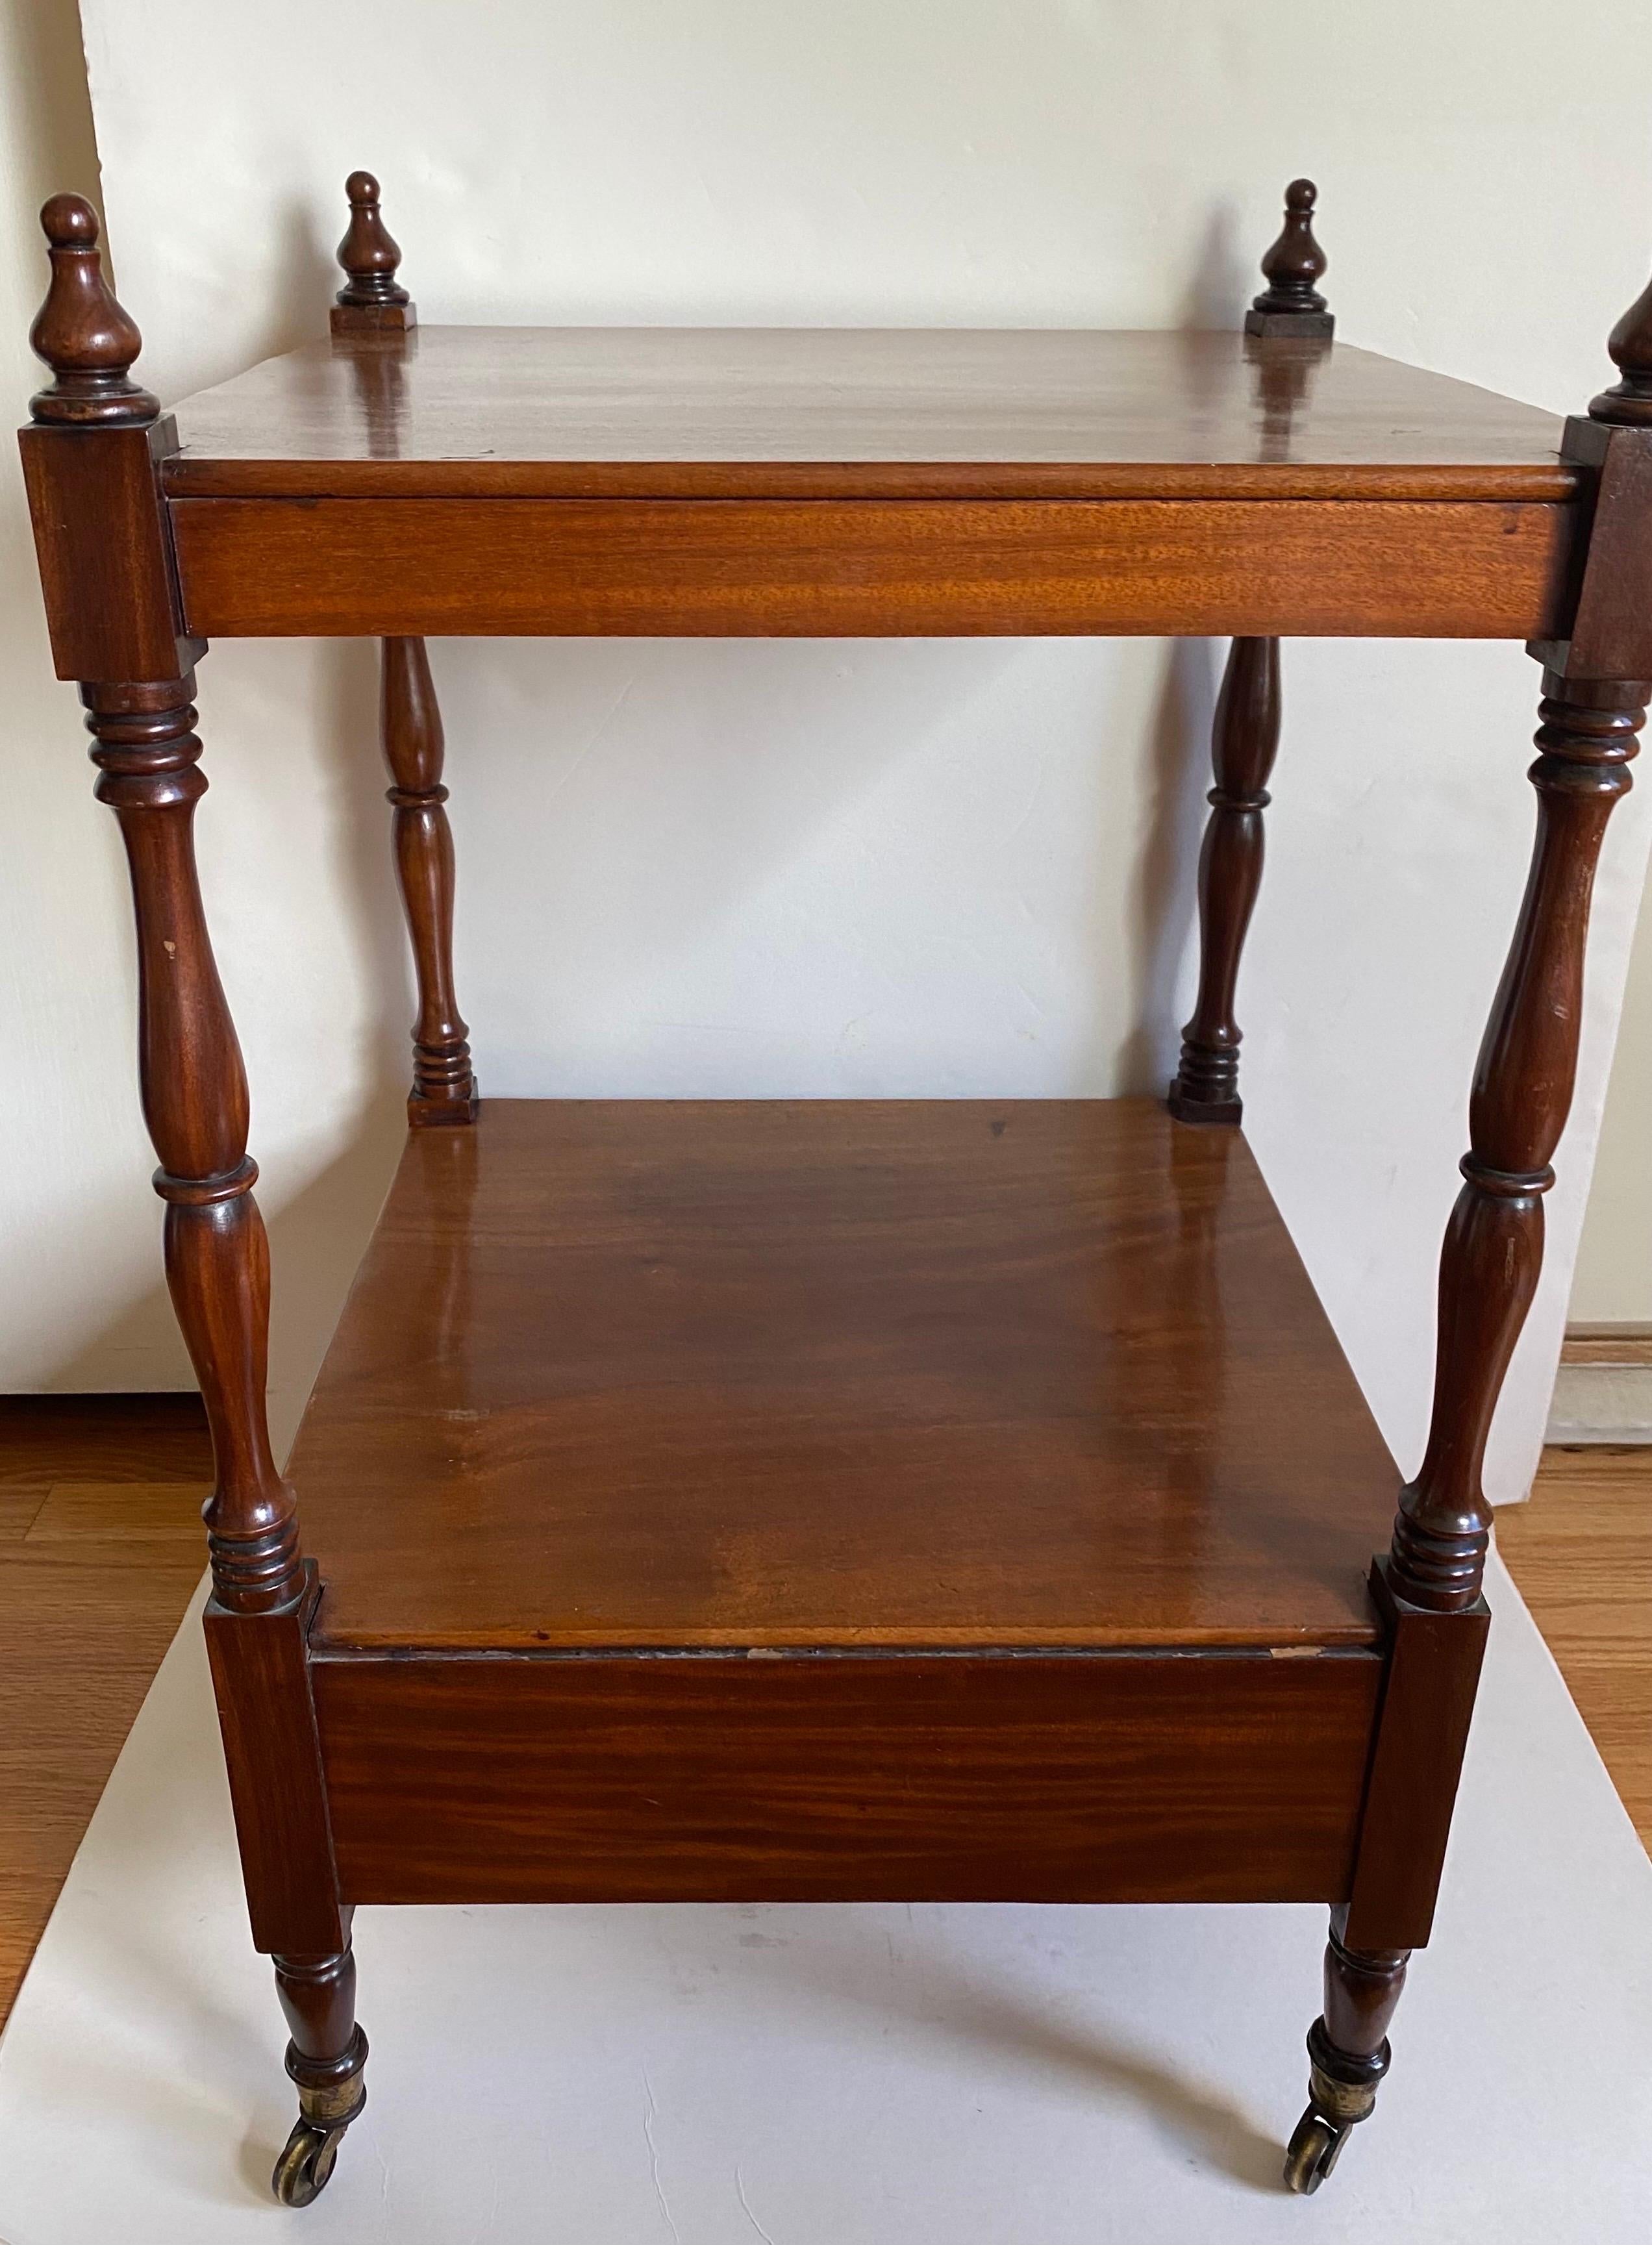 Antique English Regency Mahogany two-tier Etagere or trolley table with square top, lower shelf, one drawer, finished back, turned supports and legs ending in brass casters.

English, circa 1820 / 1830.

Provenance: Originally sold by antiques